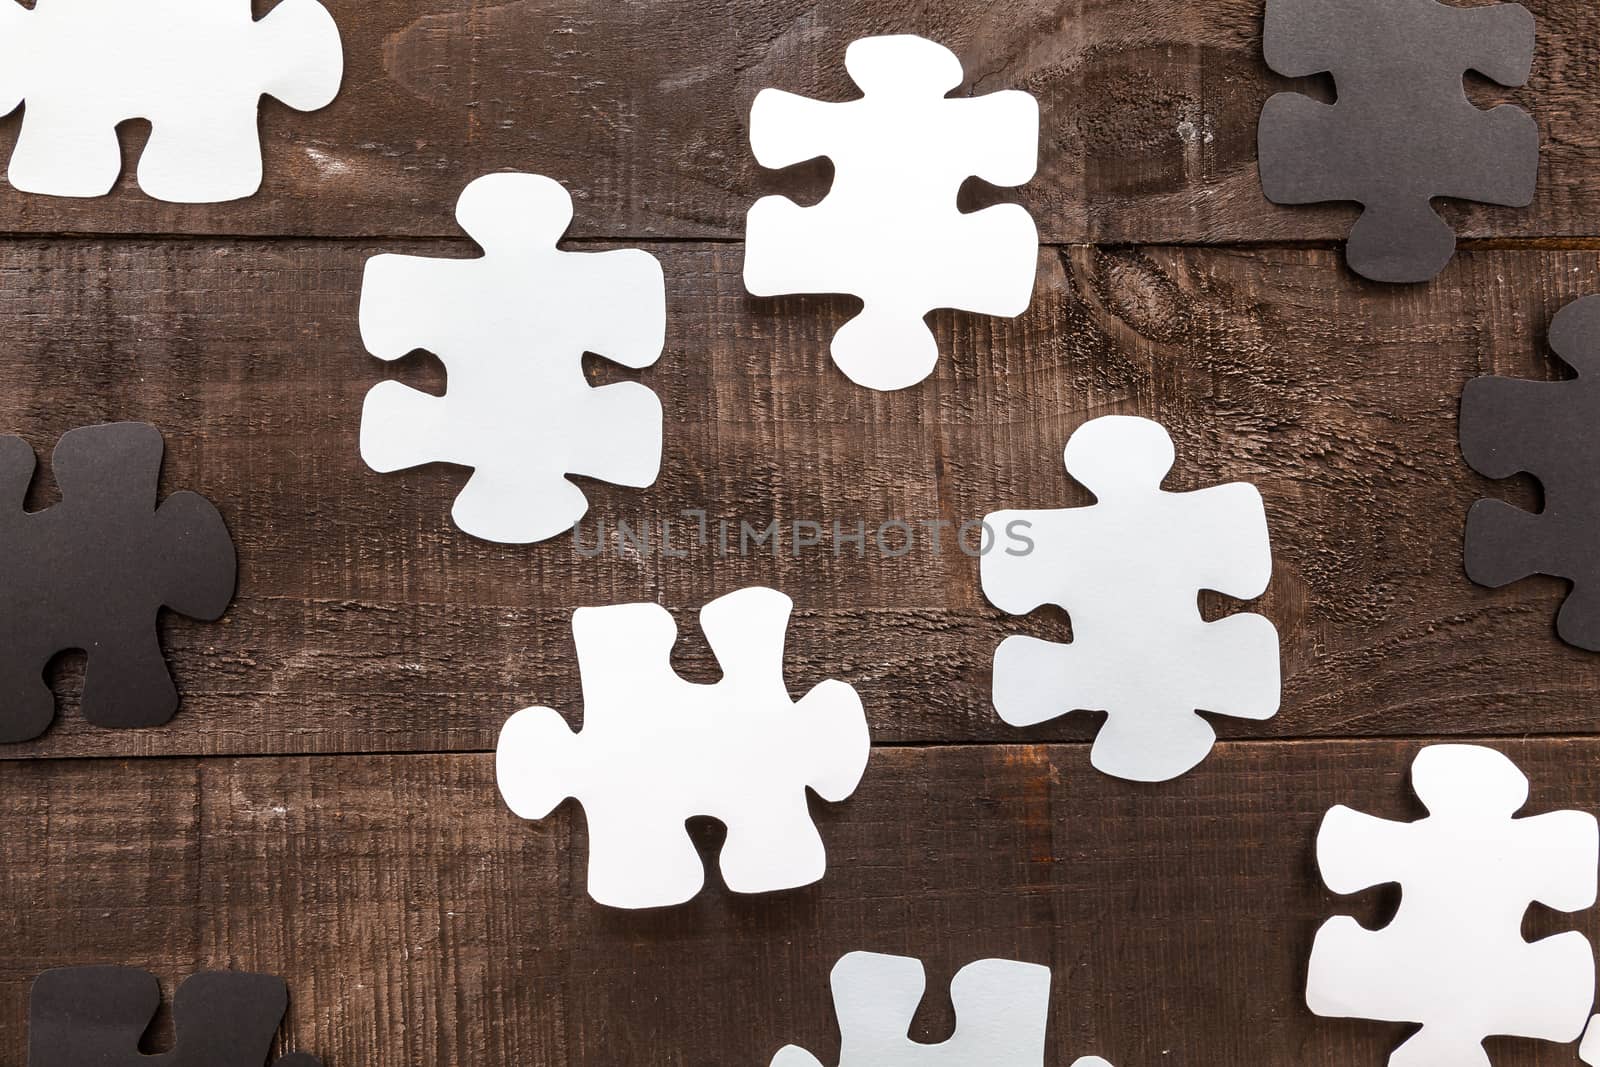 Photo illustration showing the business concept of engineering applied to industries or internet with puzzle pieces